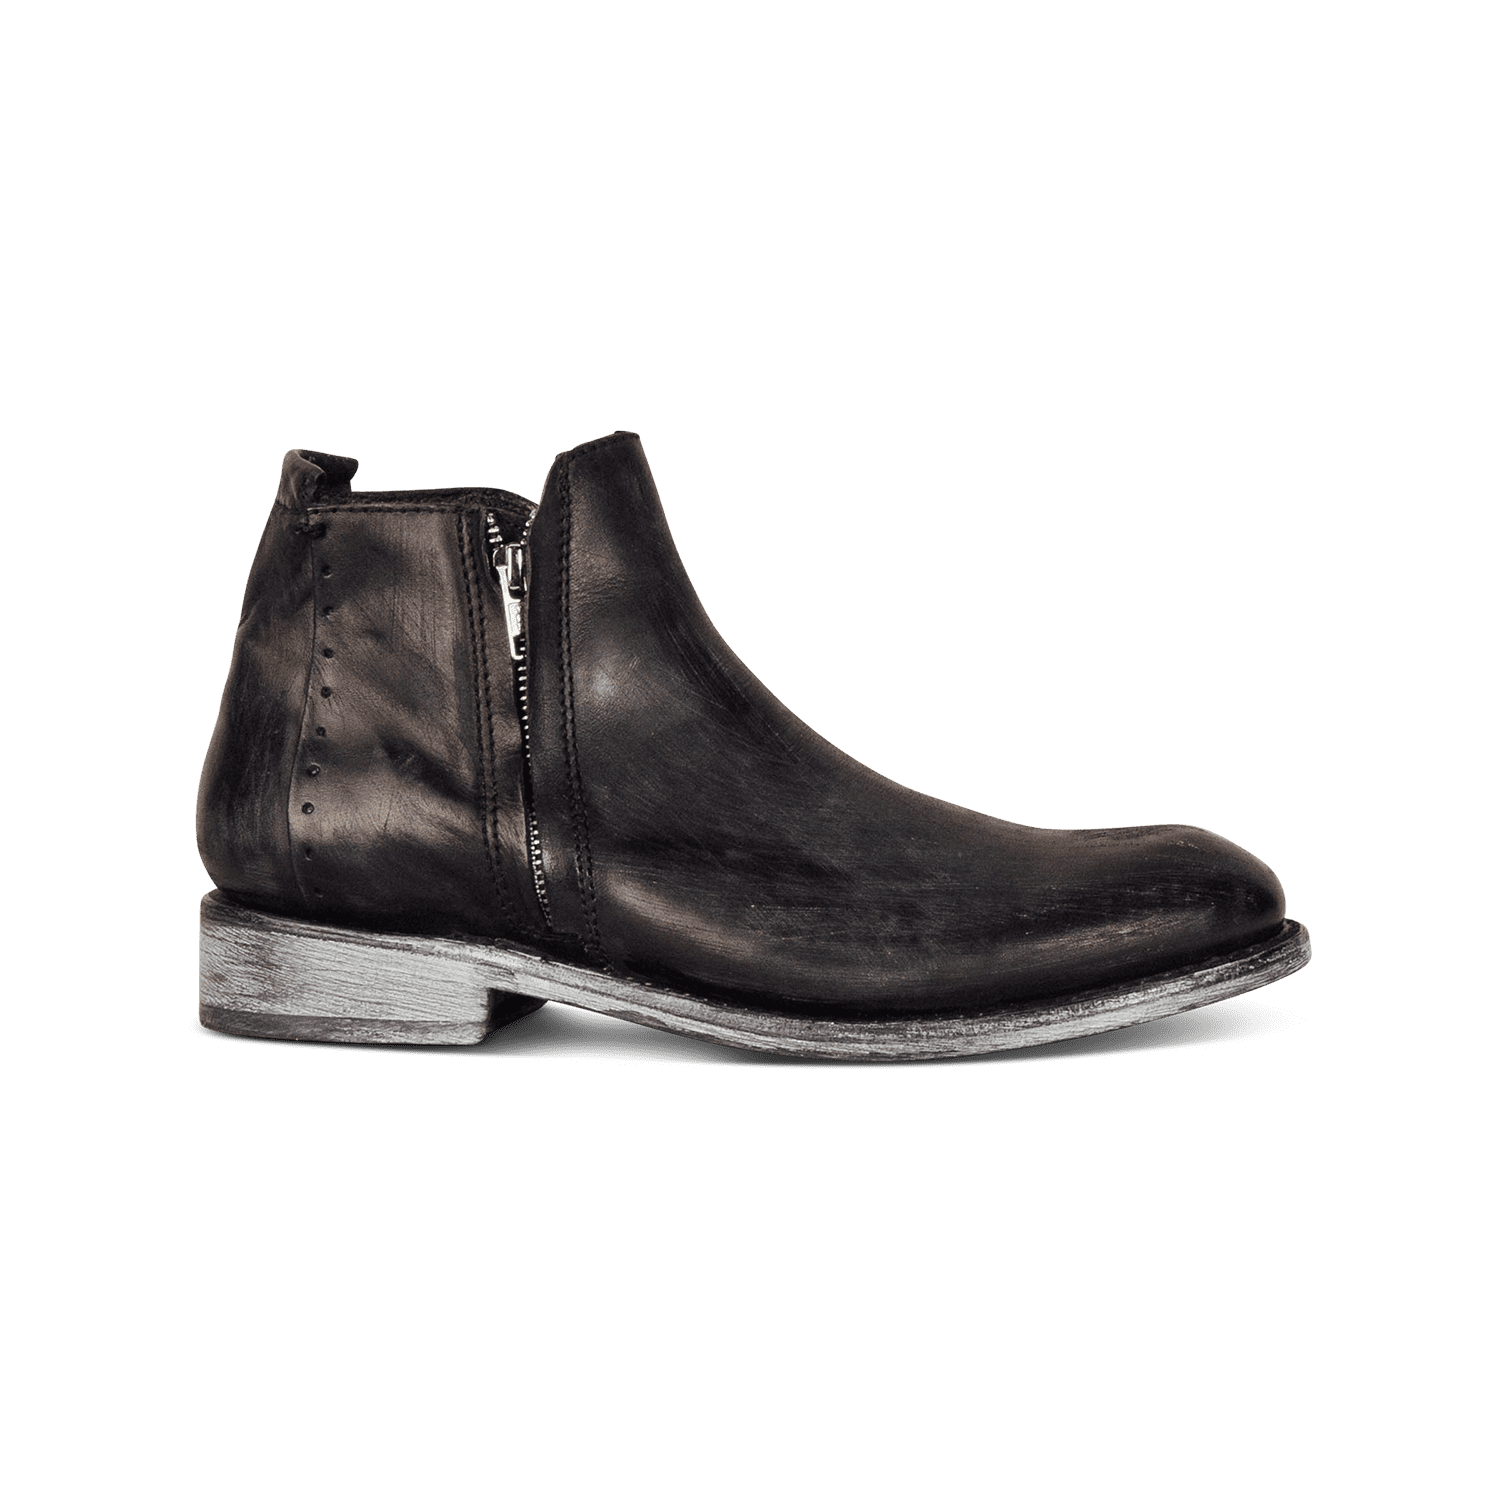 FREEBIRD men's Milo black boot with an outside and inside zip closure detail